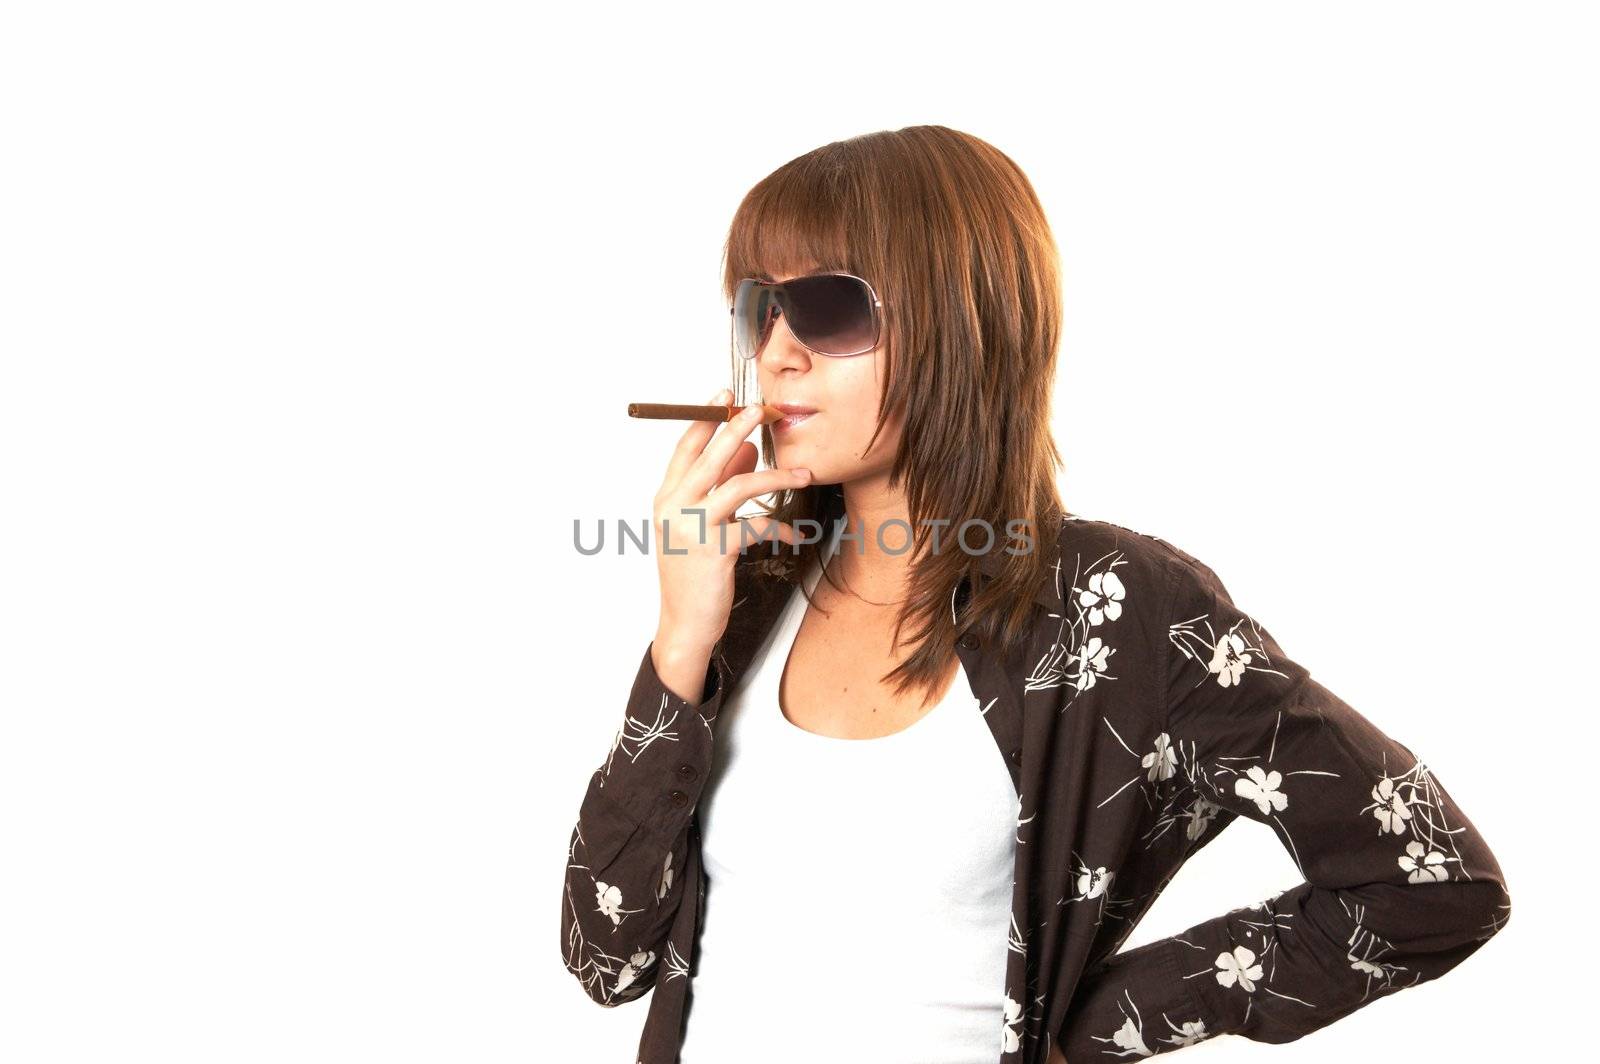 The girl in brown smoking a cigar 